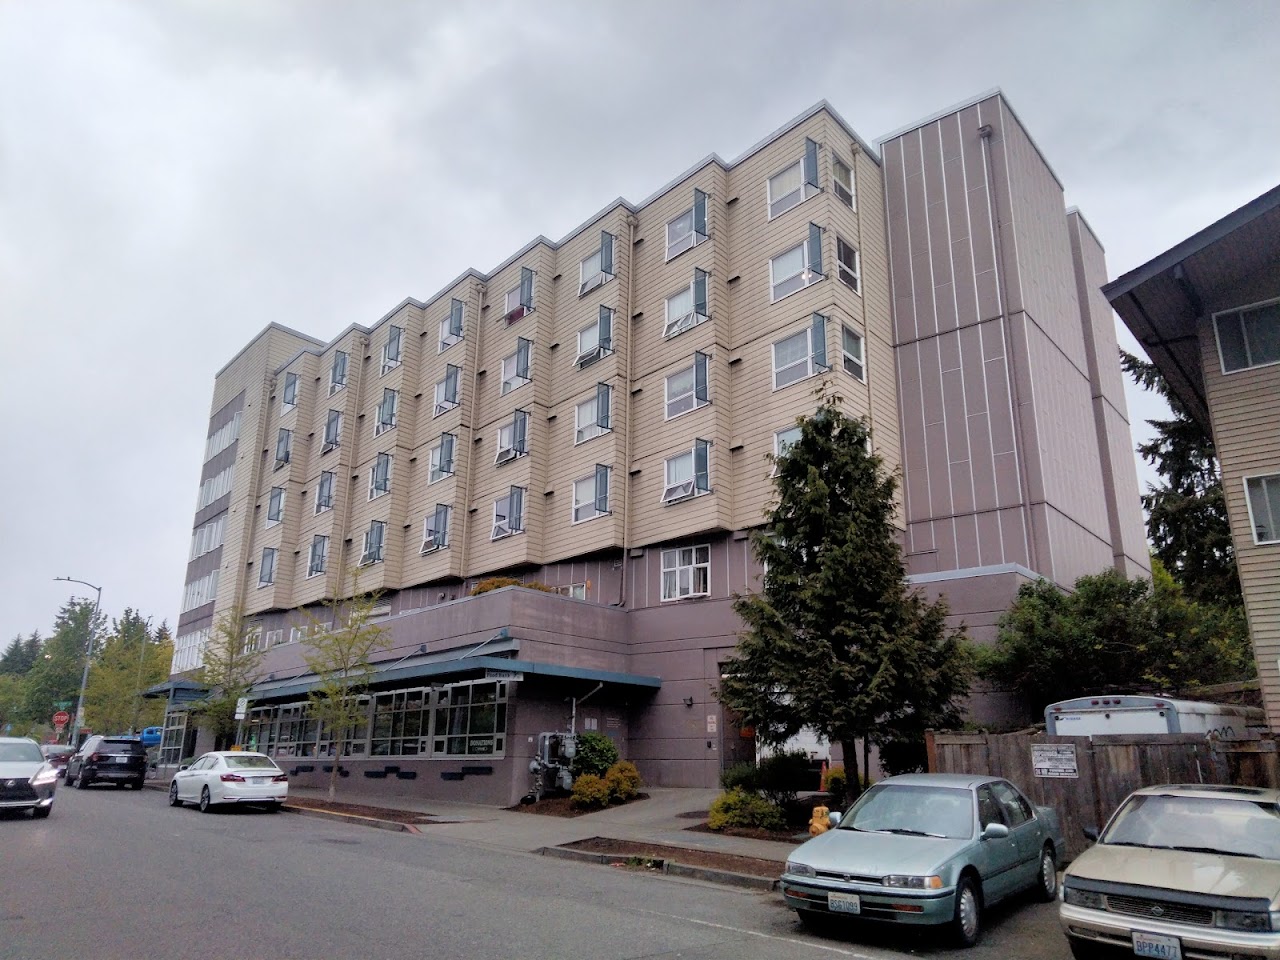 Photo of MCDERMOTT PLACE. Affordable housing located at 12740 - 33RD AVE NE SEATTLE, WA 98125